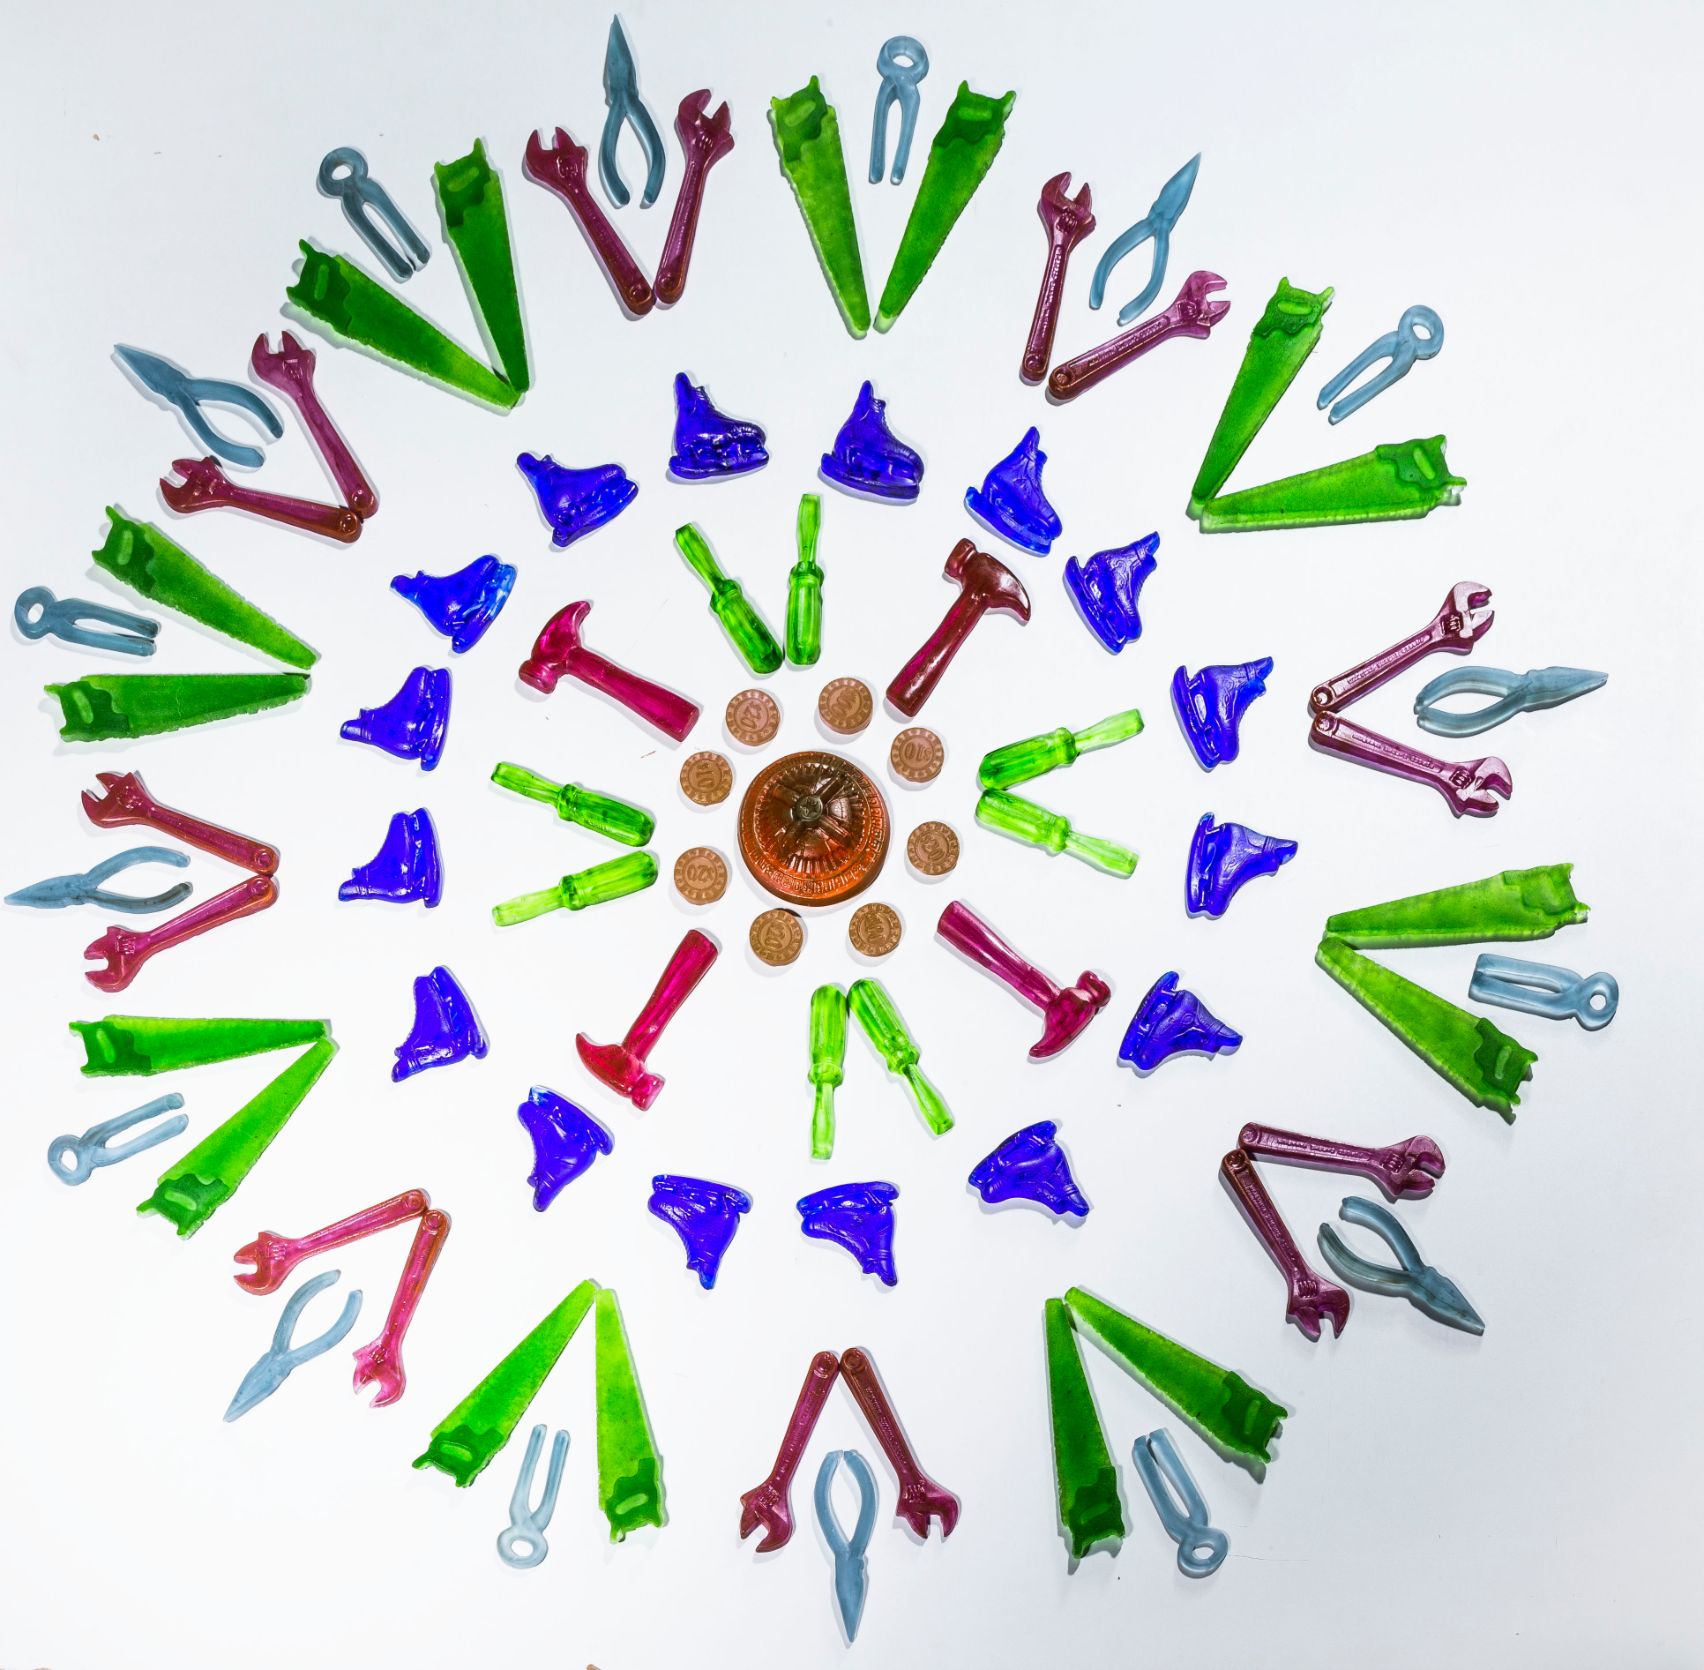 White, green, red and blue pieces of glass arranged in a circular, mandala.